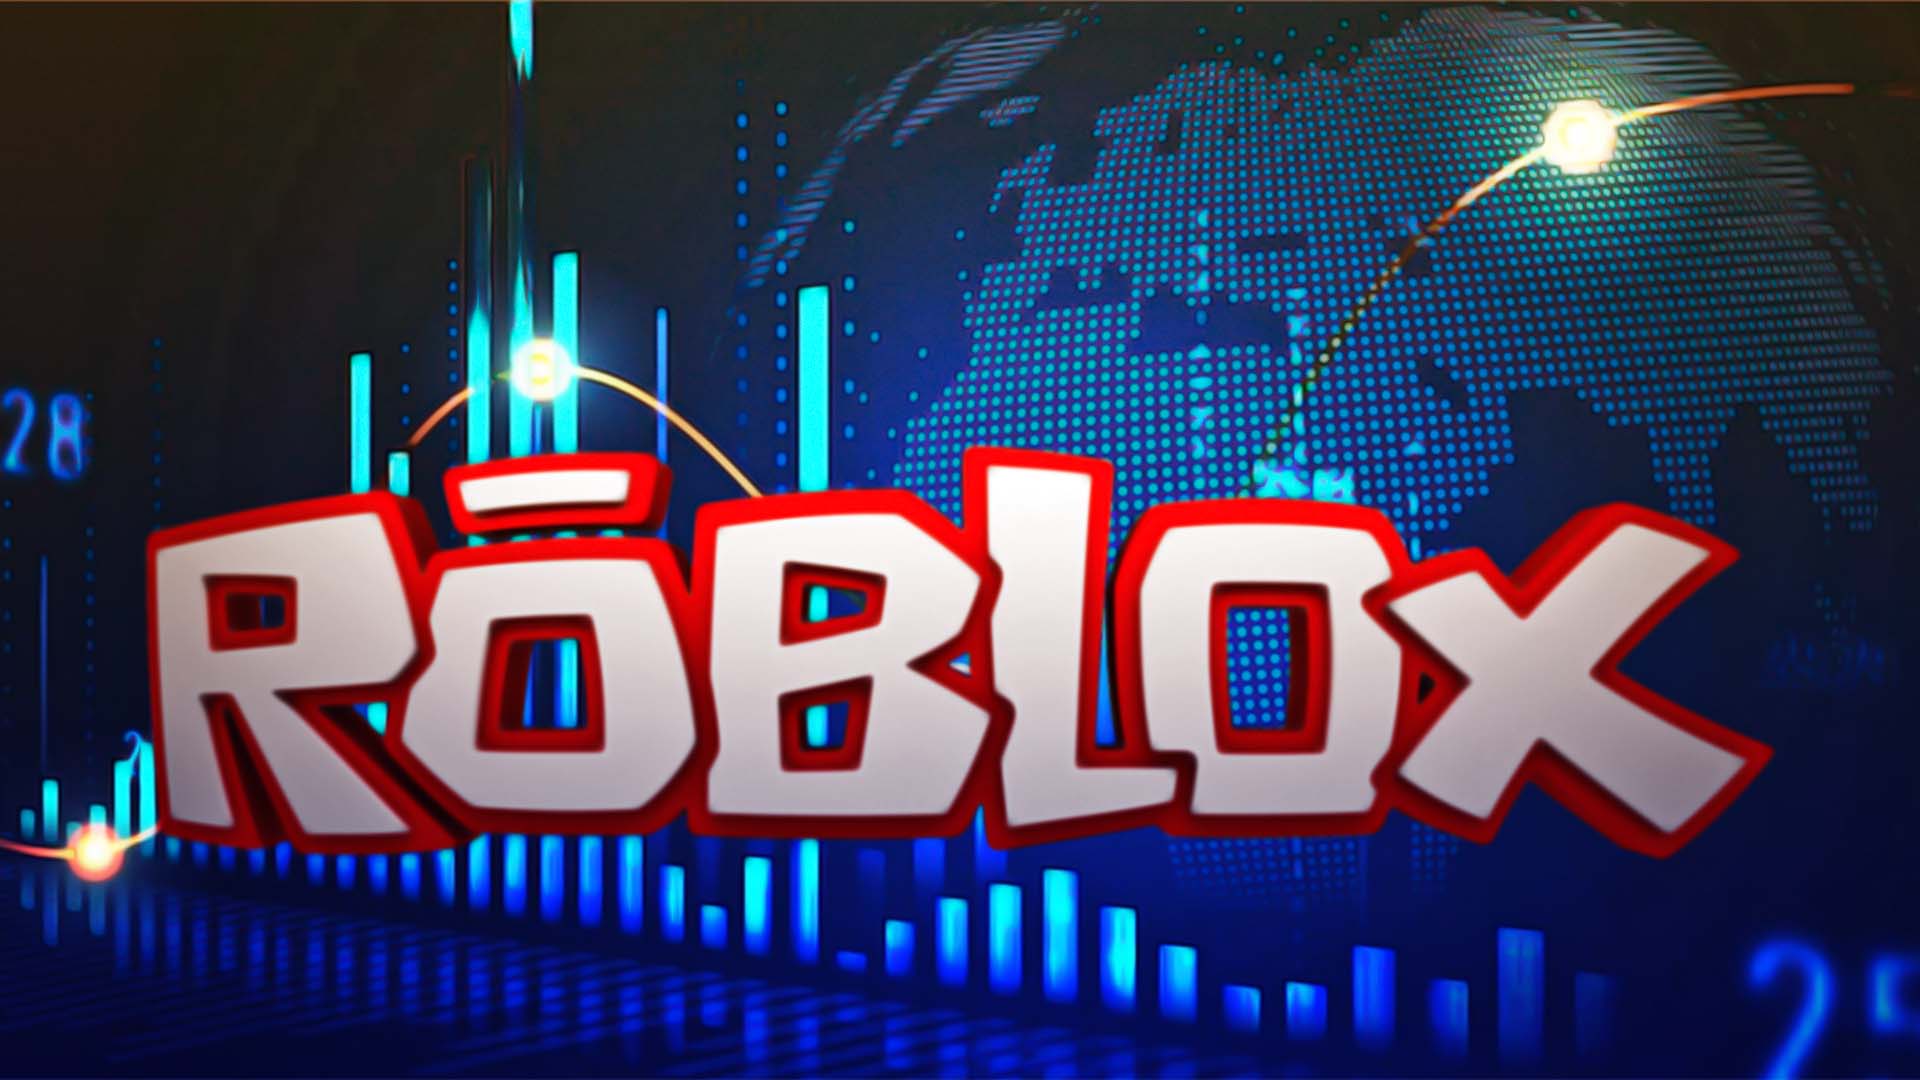 Is Roblox Stock a Game Bulls Want to Play?